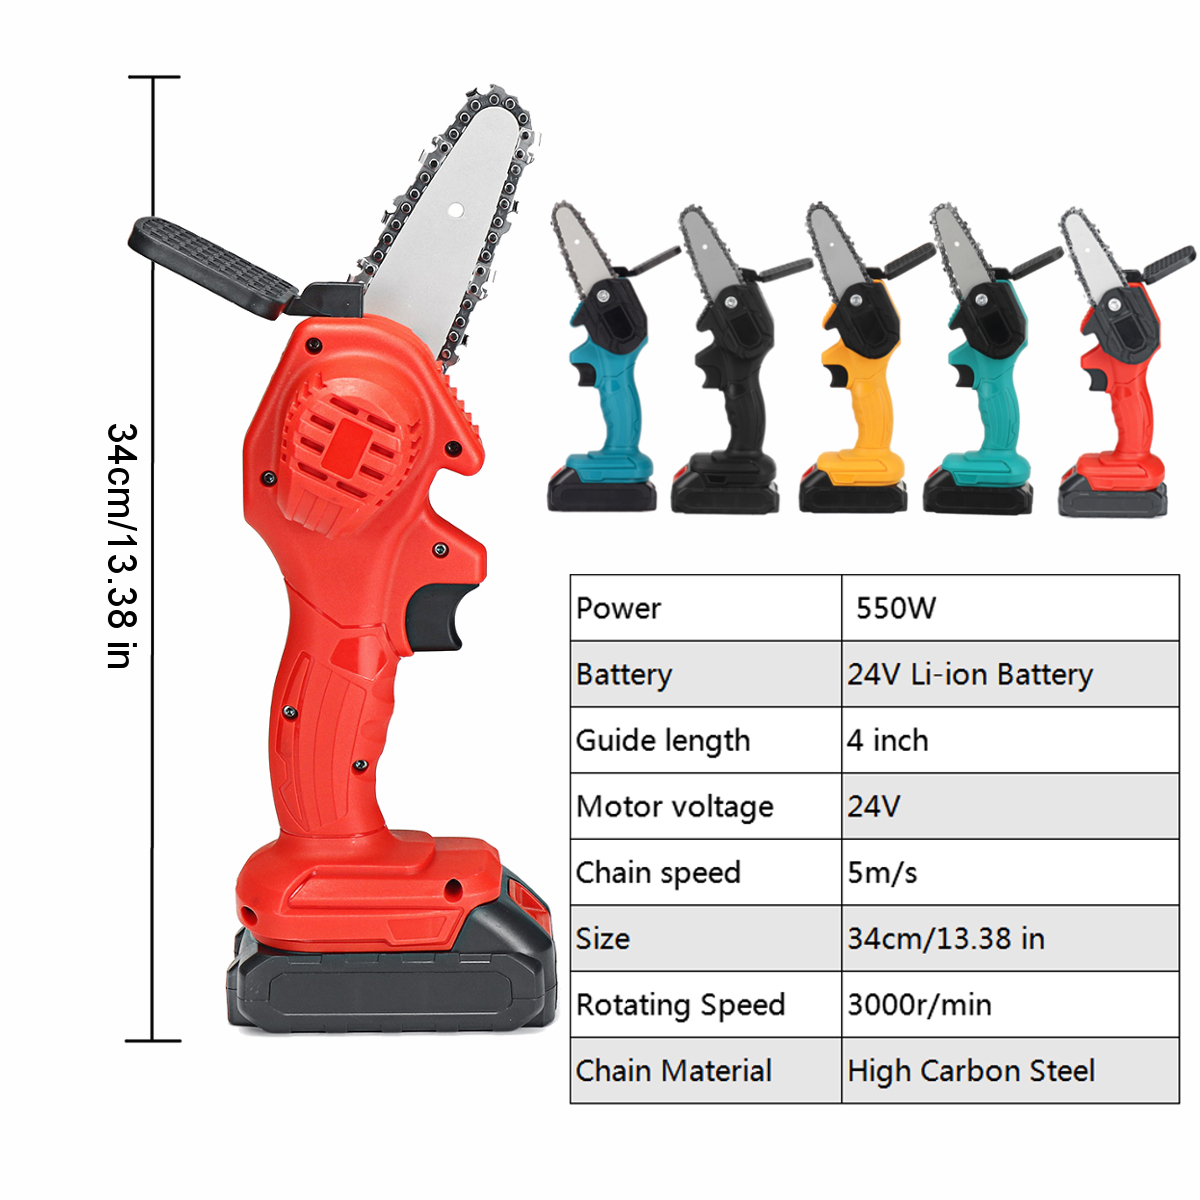 4-Inch-Portable-Cordless-Electric-Chain-Saw-Wood-3000rmin-Tree-ChainSaws-Wood-Cutting-Tool-W-1-or-2--1770254-2